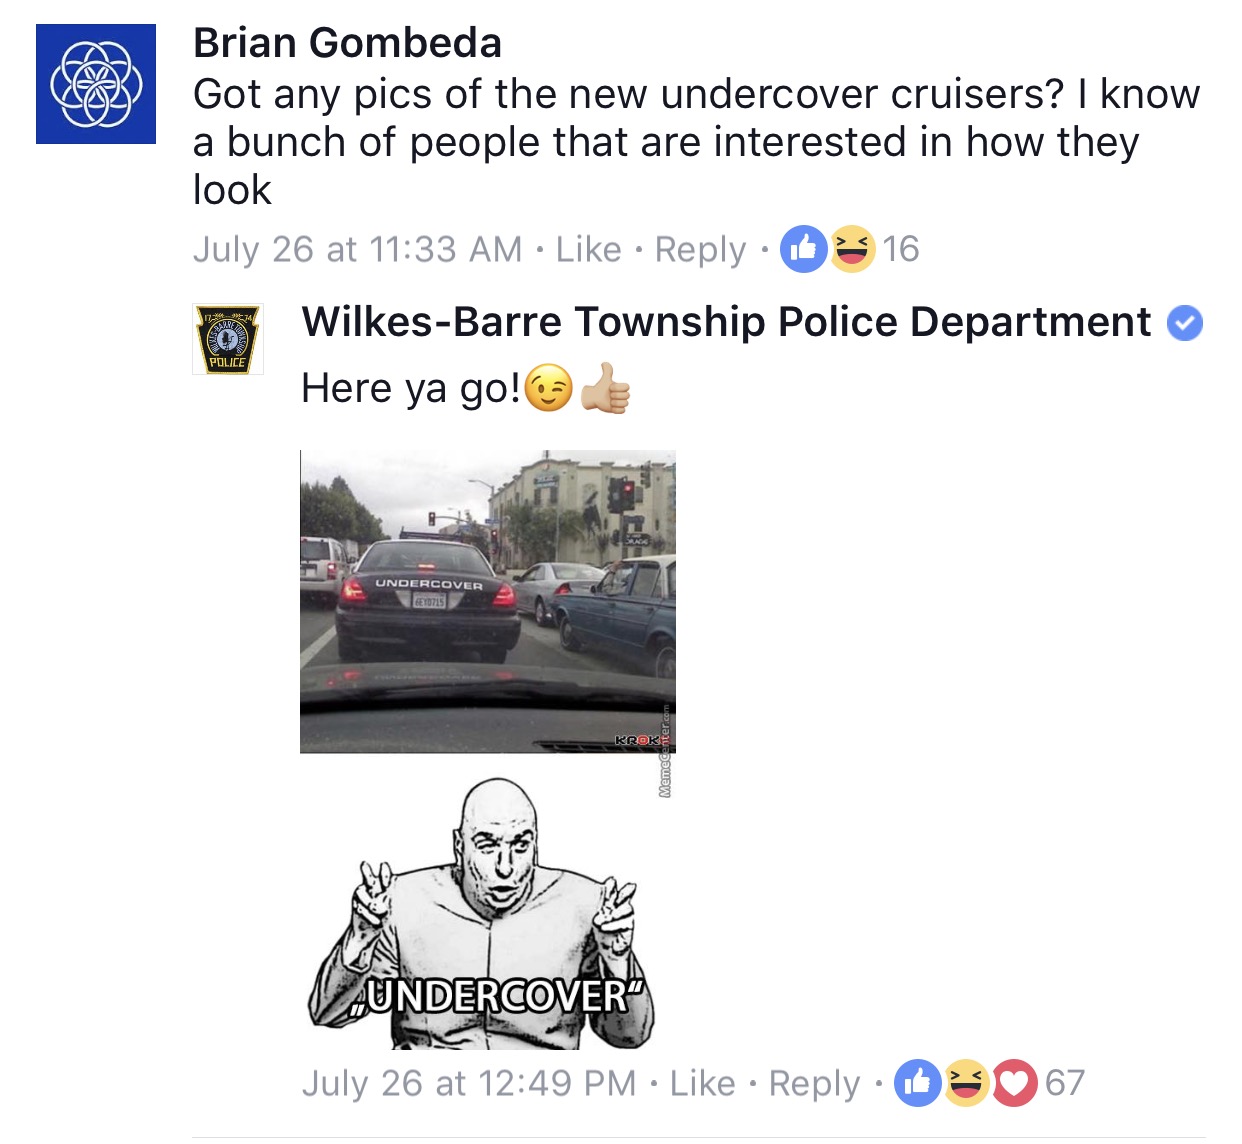 funny fails - Brian Gombeda Got any pics of the new undercover cruisers? I know a bunch of people that are interested in how they look July 26 at 16 To WilkesBarre Township Police Department Here ya go! Undercover EX0715 Krok Memecenter.com Waundercover" 